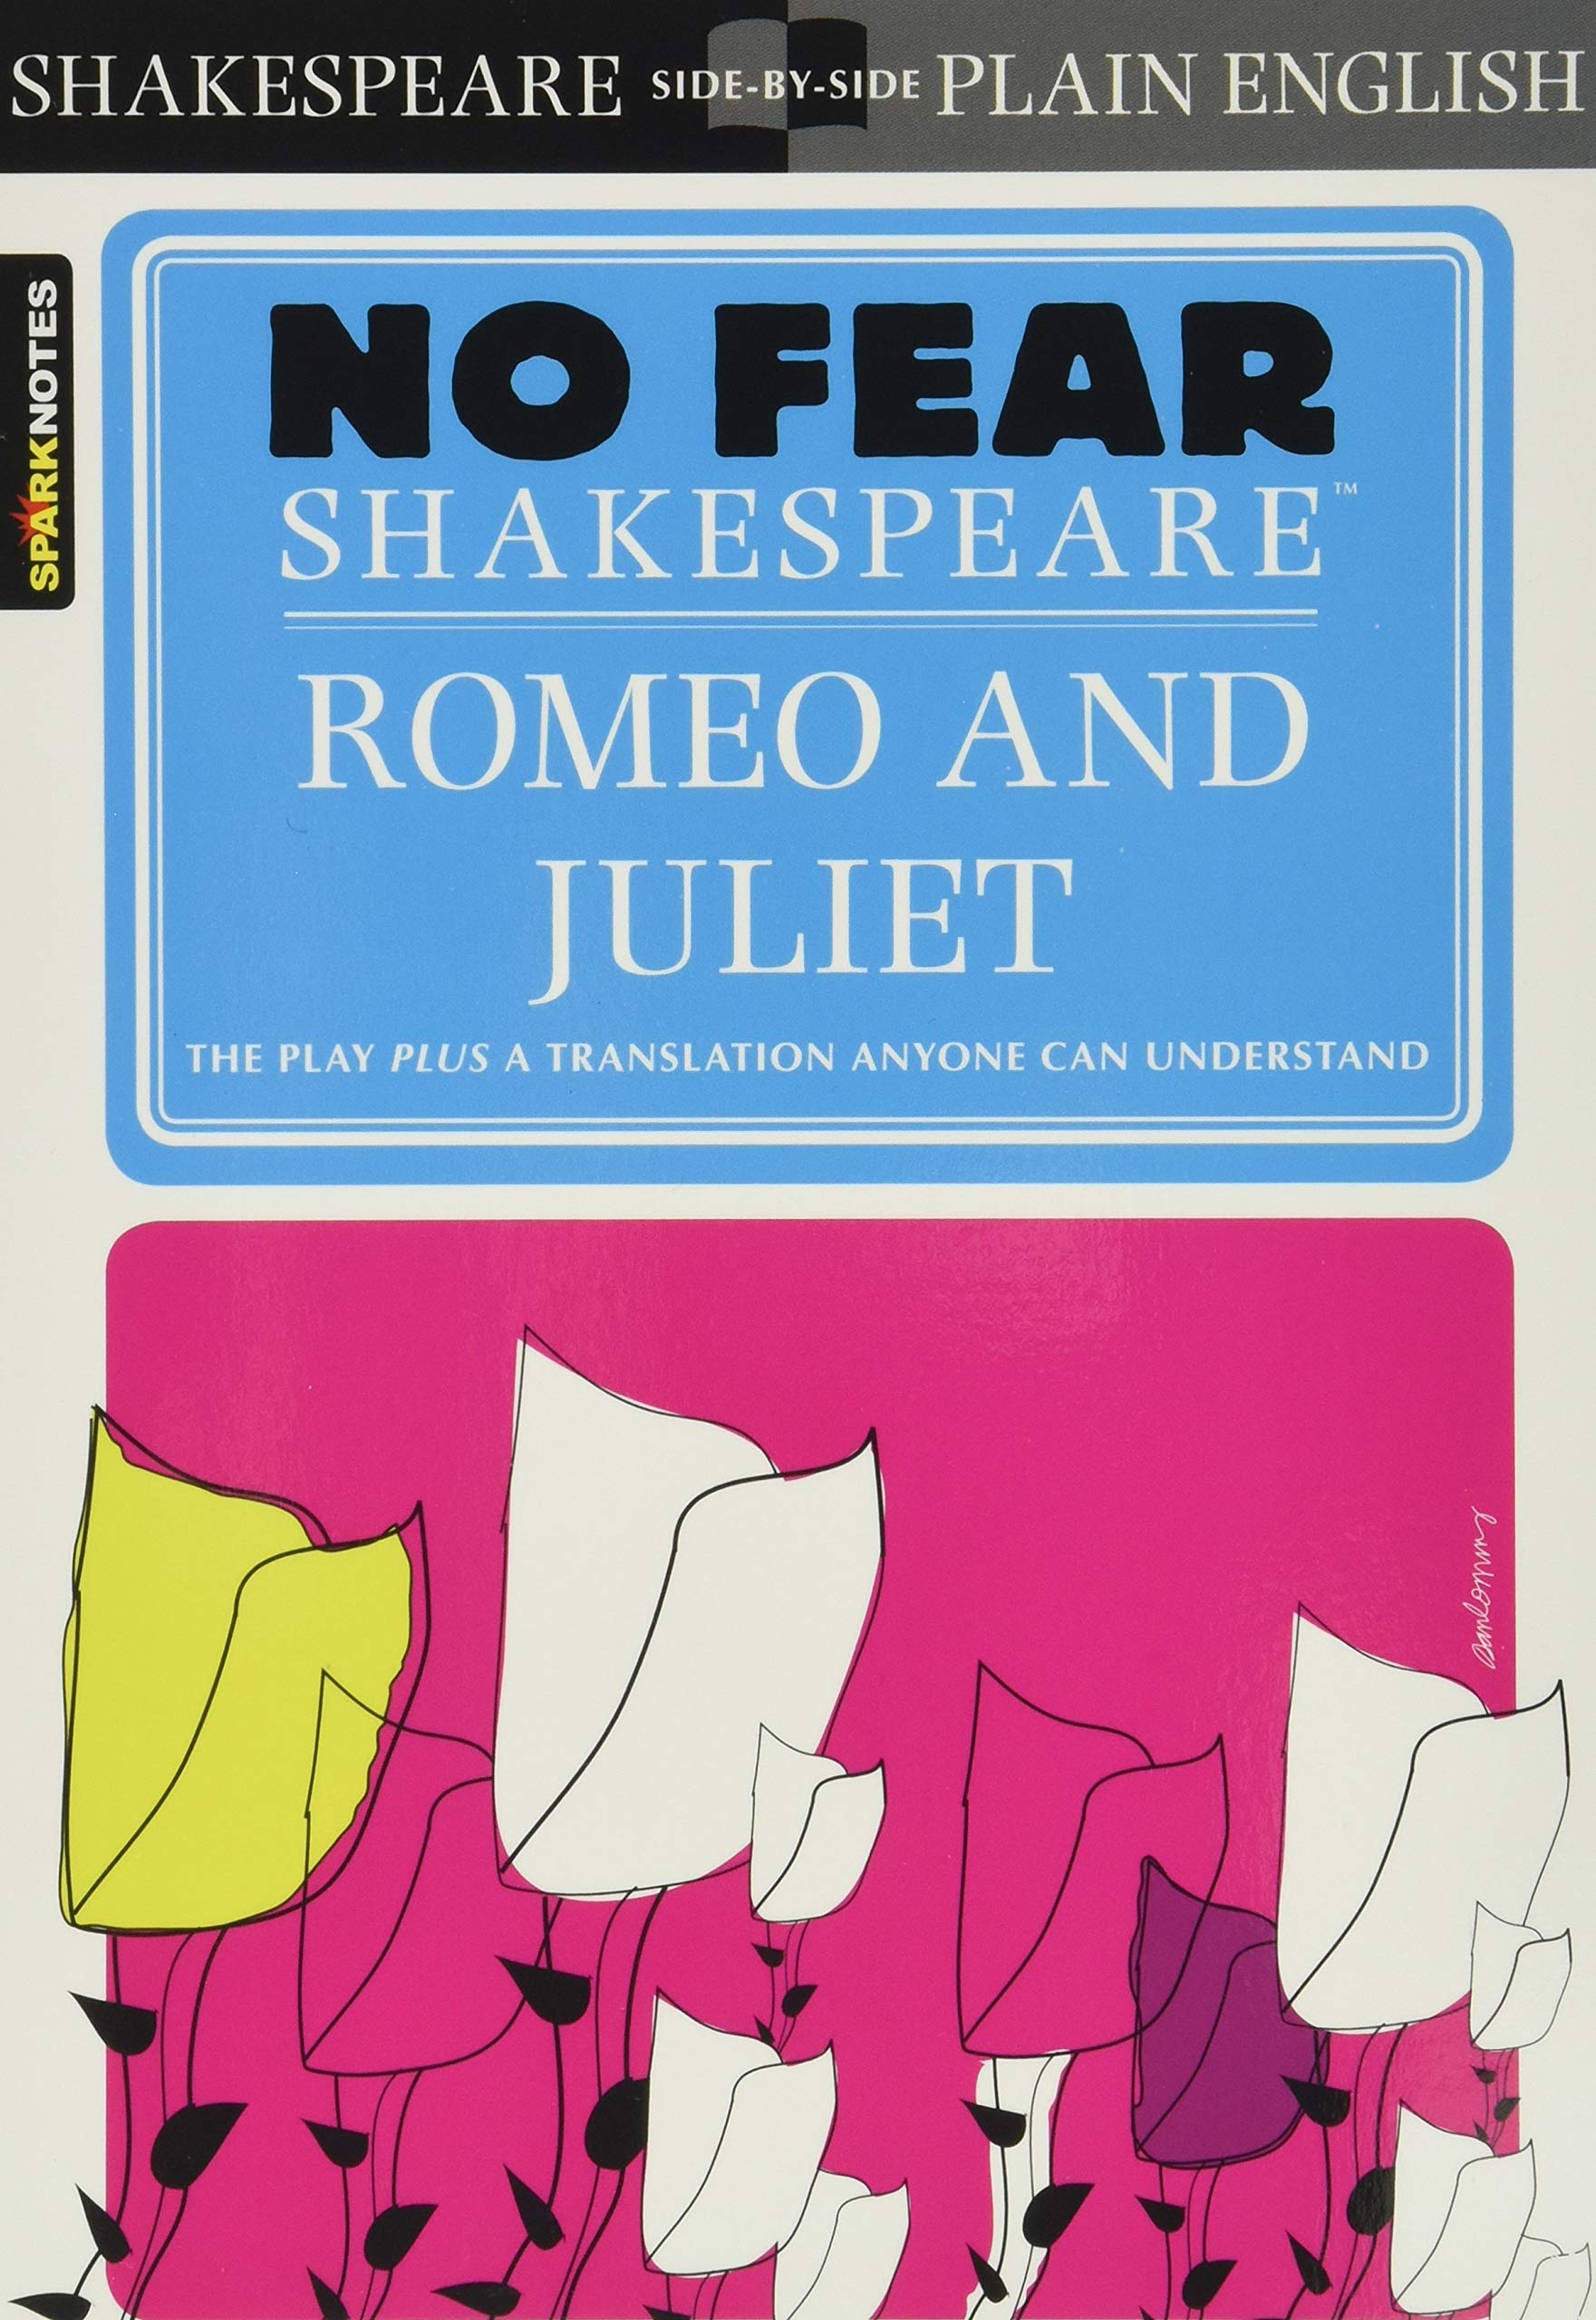 Sparknotes Romeo and Juliet (No Fear Shakespeare) [Paperback]